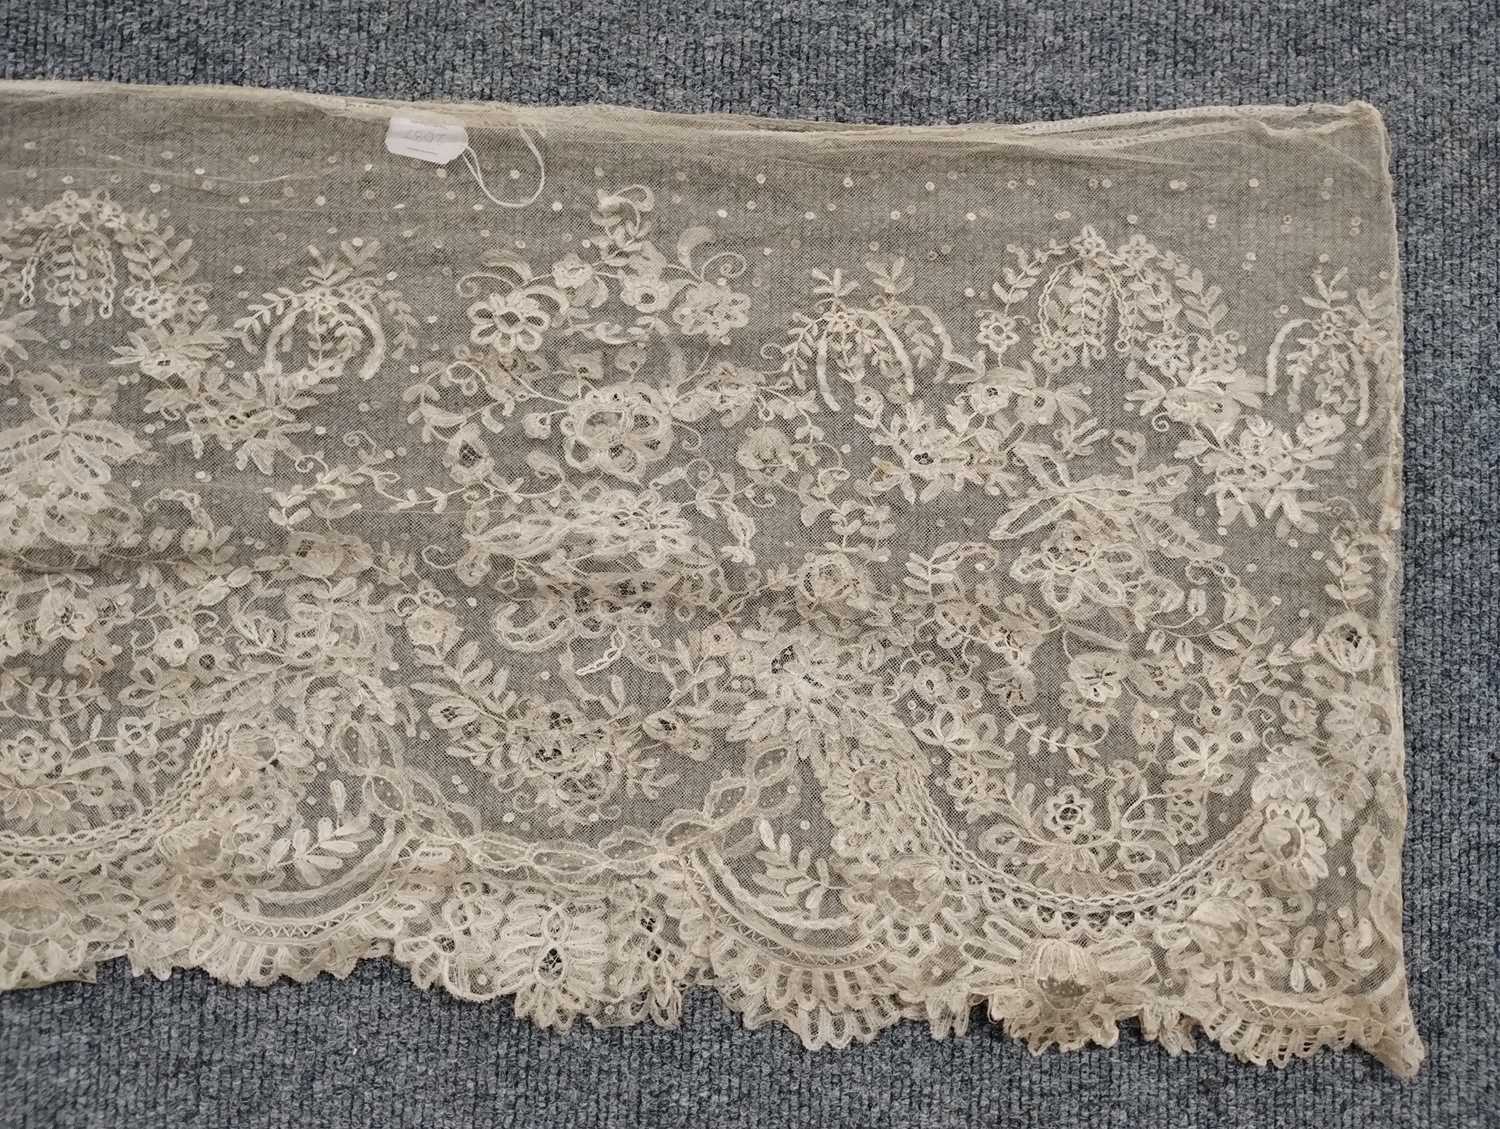 Early 20th Century Lace comprising a flounce with appliquéd flower heads and motifs within a - Image 2 of 32